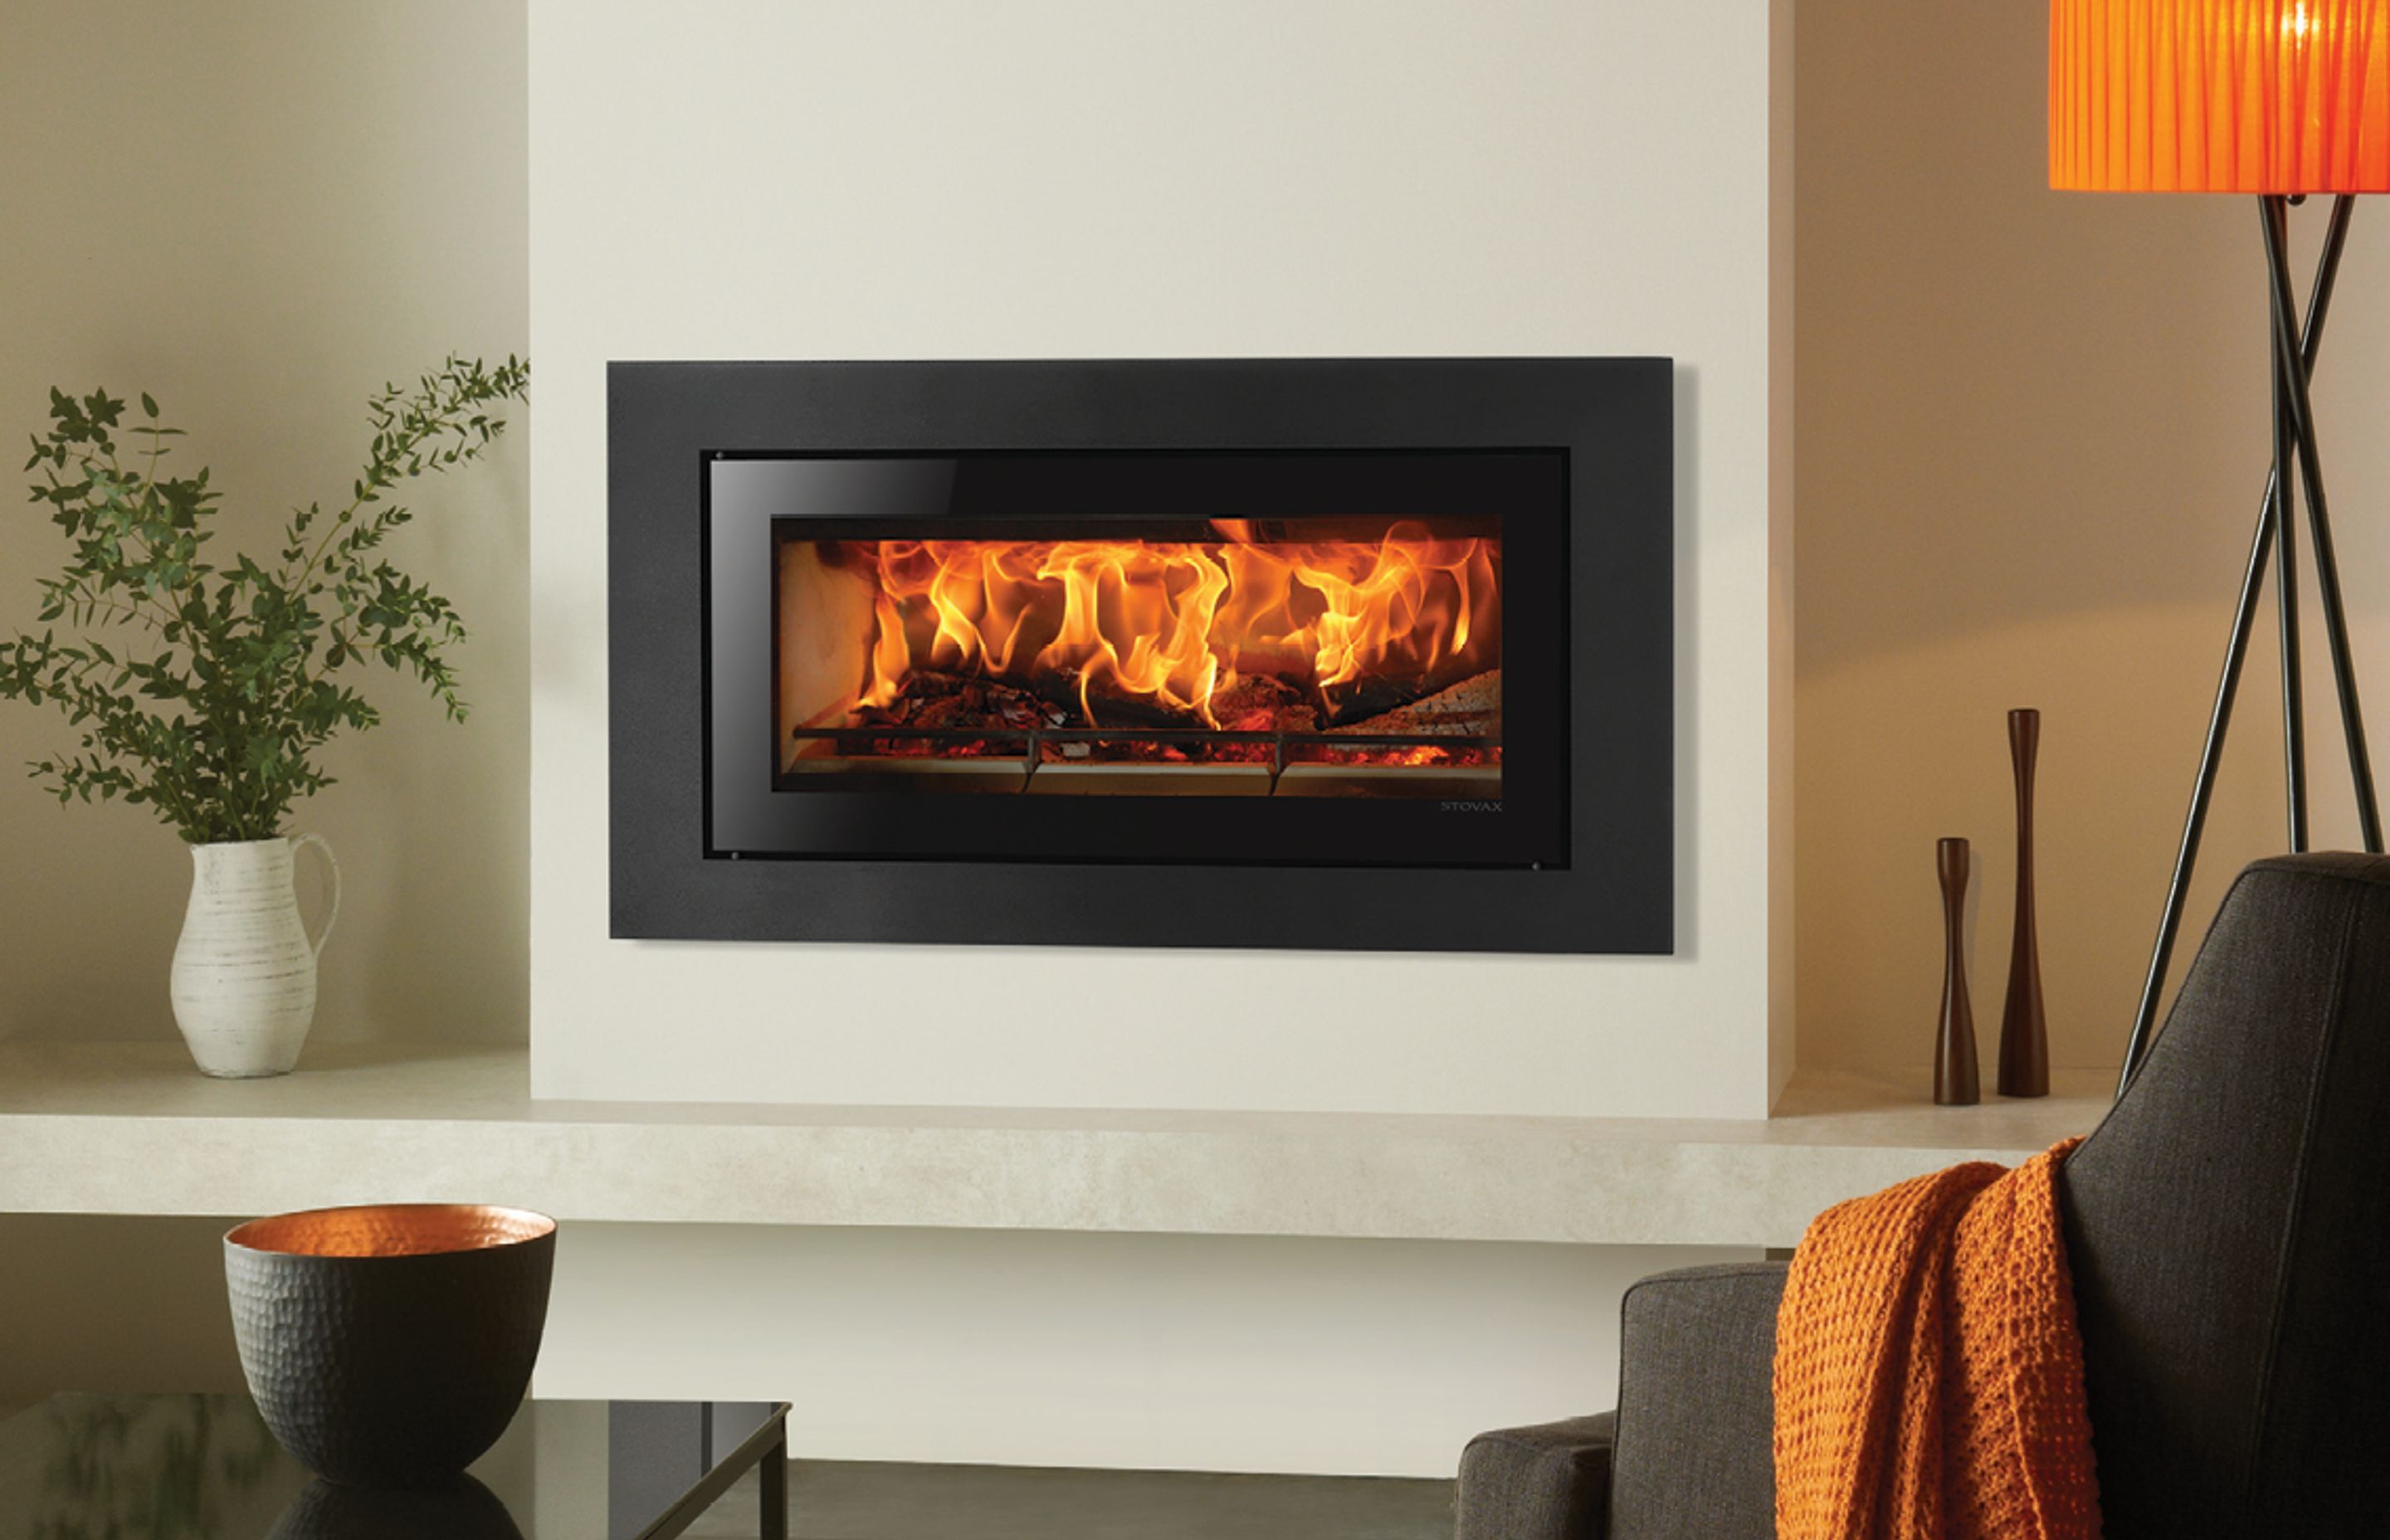 The Stovax Studio 2 Clean Air (urban and rural) inbuilt wood fire features the latest clean-burn combustion system, allowing it to burn logs with outstanding efficiency, resulting in more heat delivery into the room and less going up the chimney.